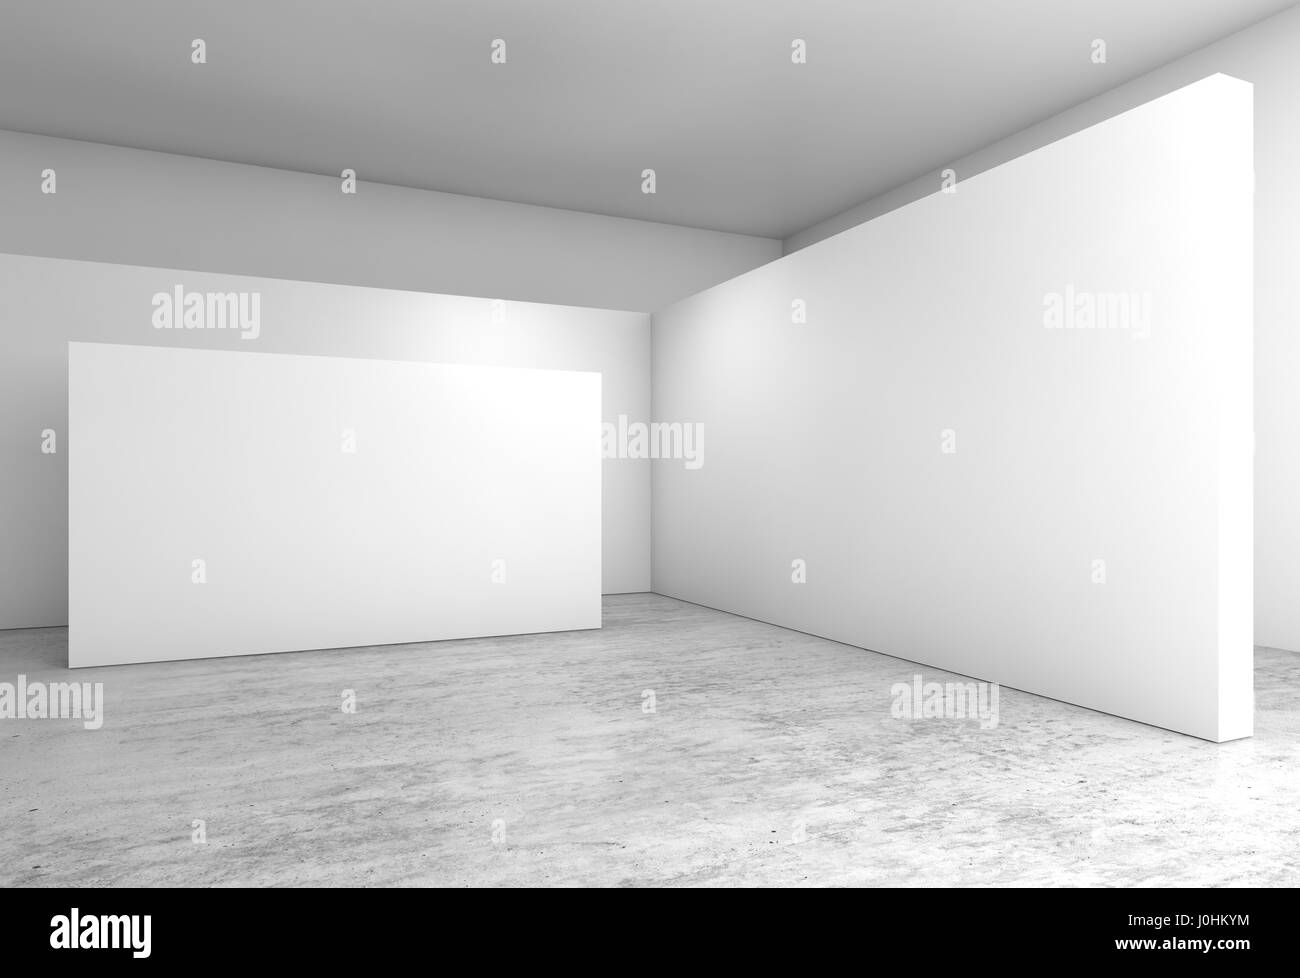 Abstract Empty Interior White Walls Installation On